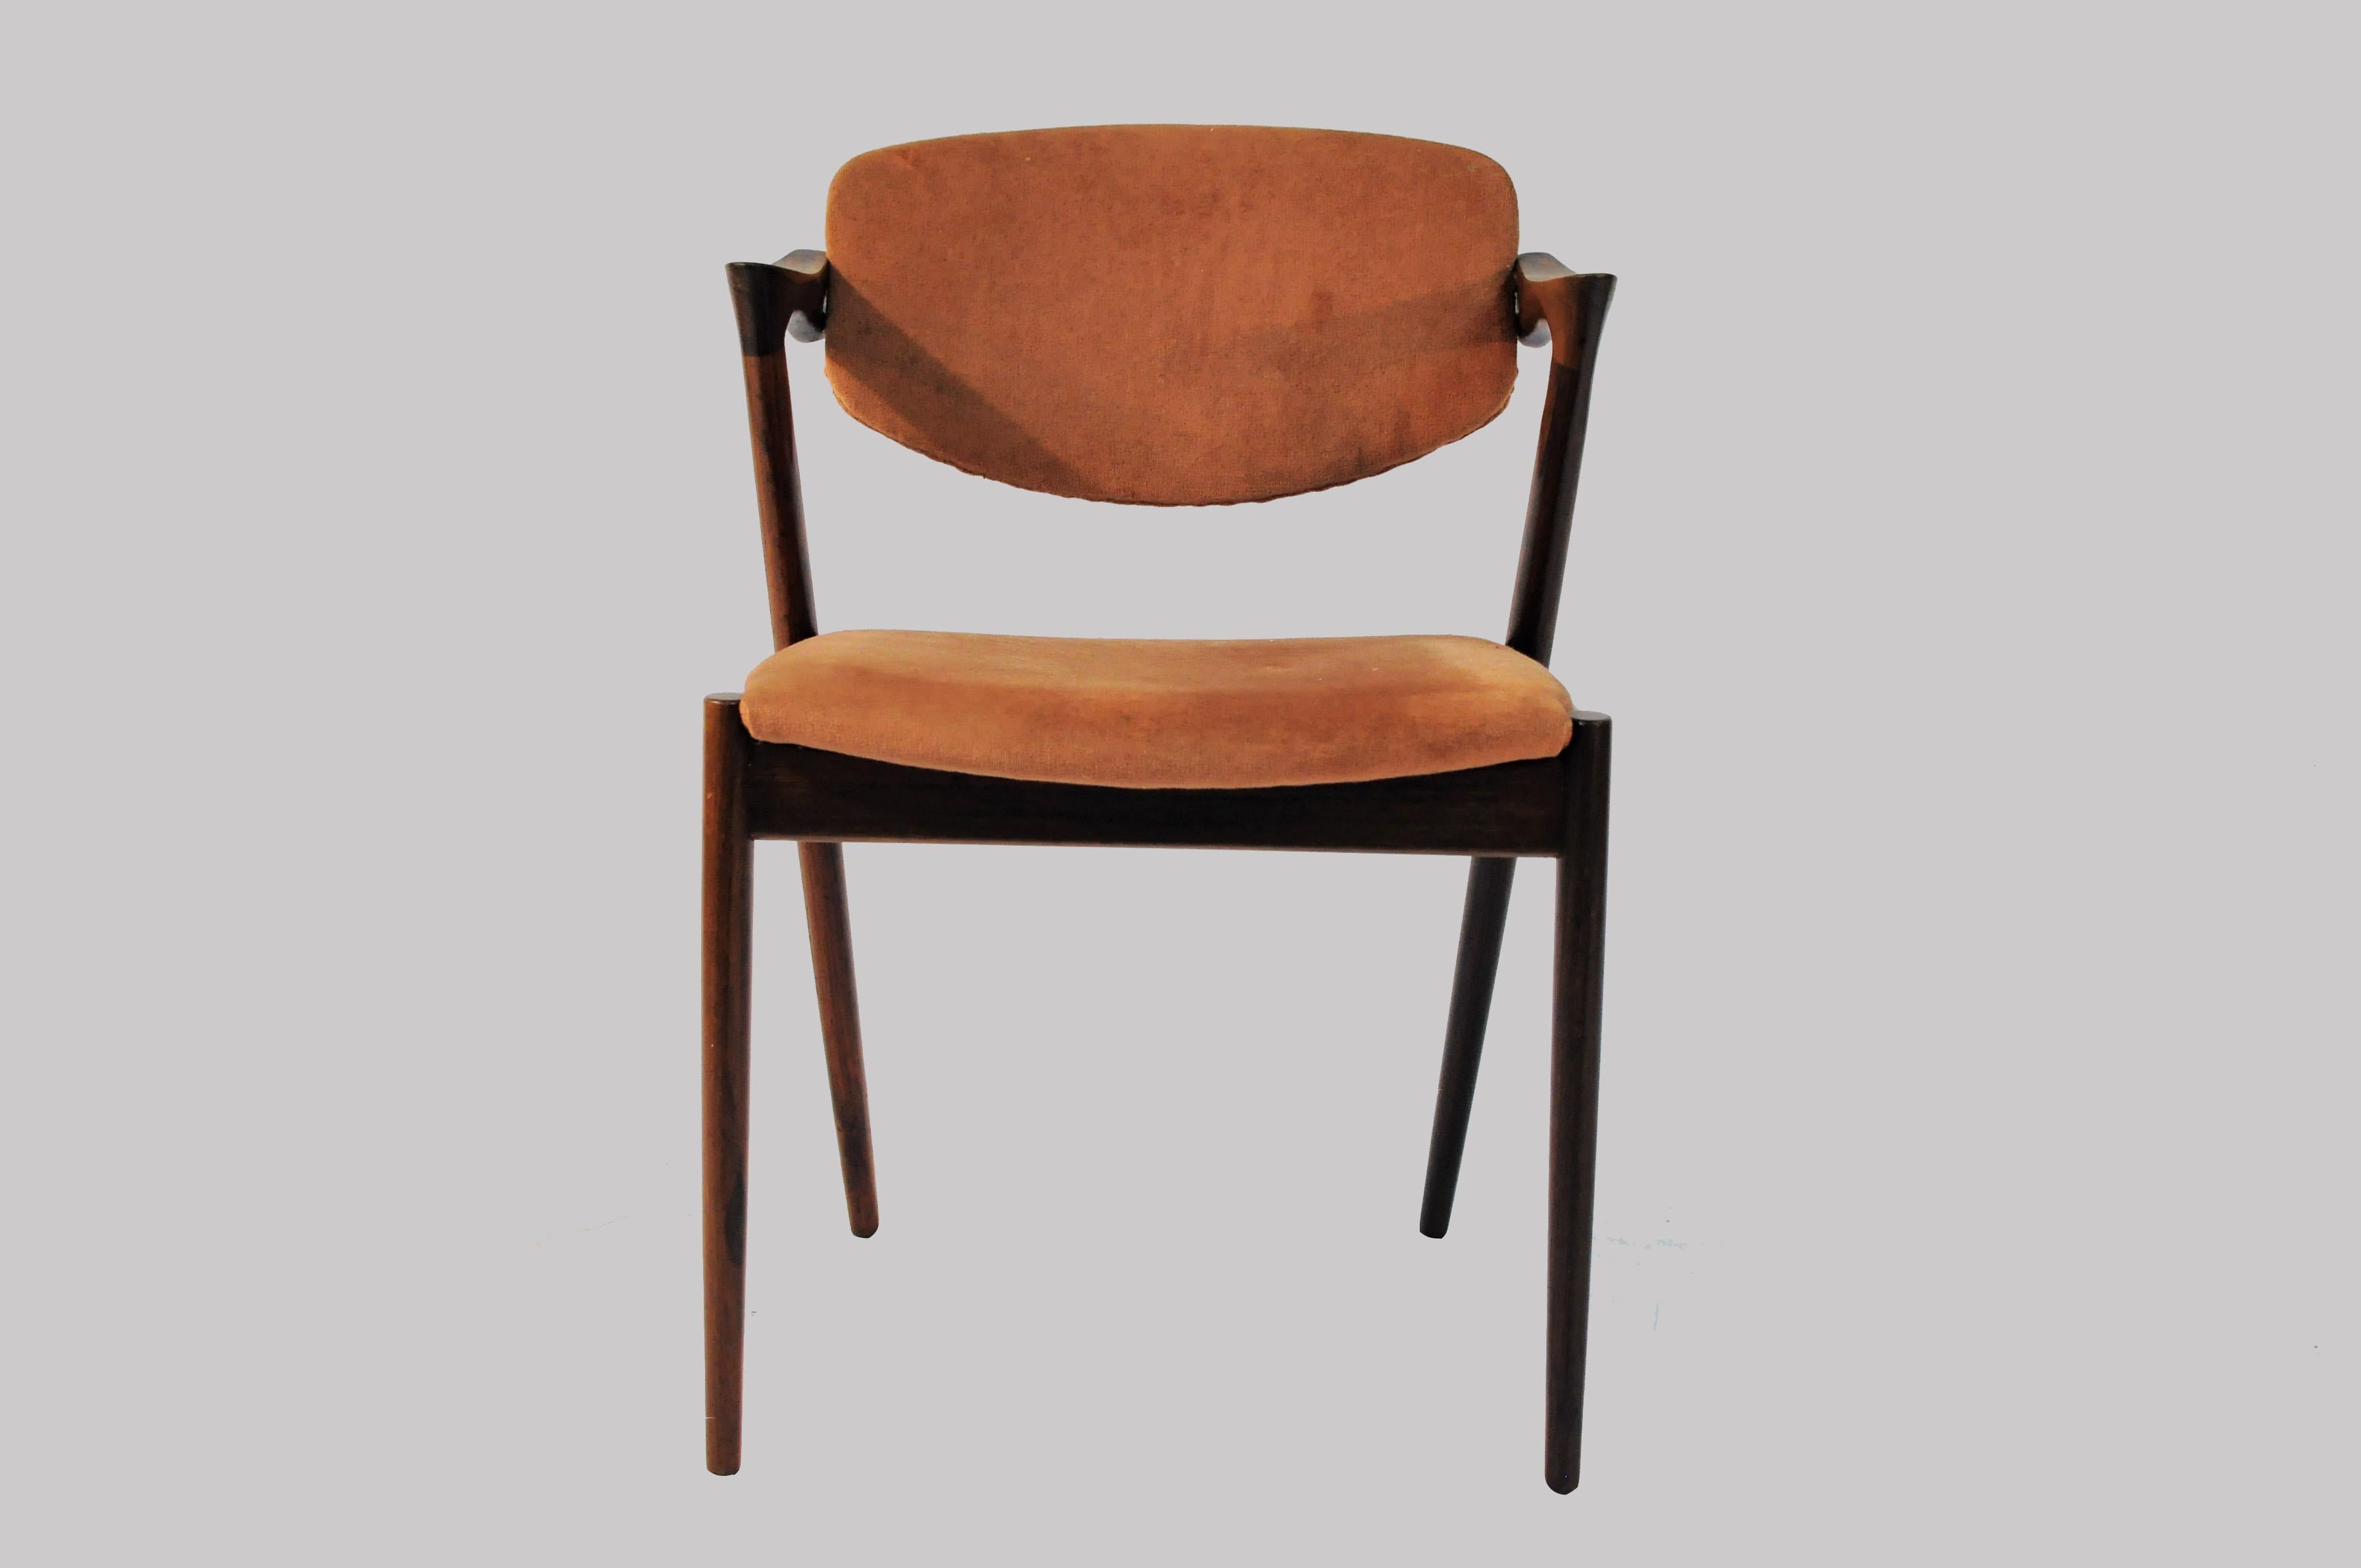 Set of eight fully restored, 1960s rosewood dining chairs by Kai Kristiansen for Schous Møbelfabrik.

The chairs have Kai Kristiansens typical light and elegant design that make them fit in easily where you want them in your home - a design that was